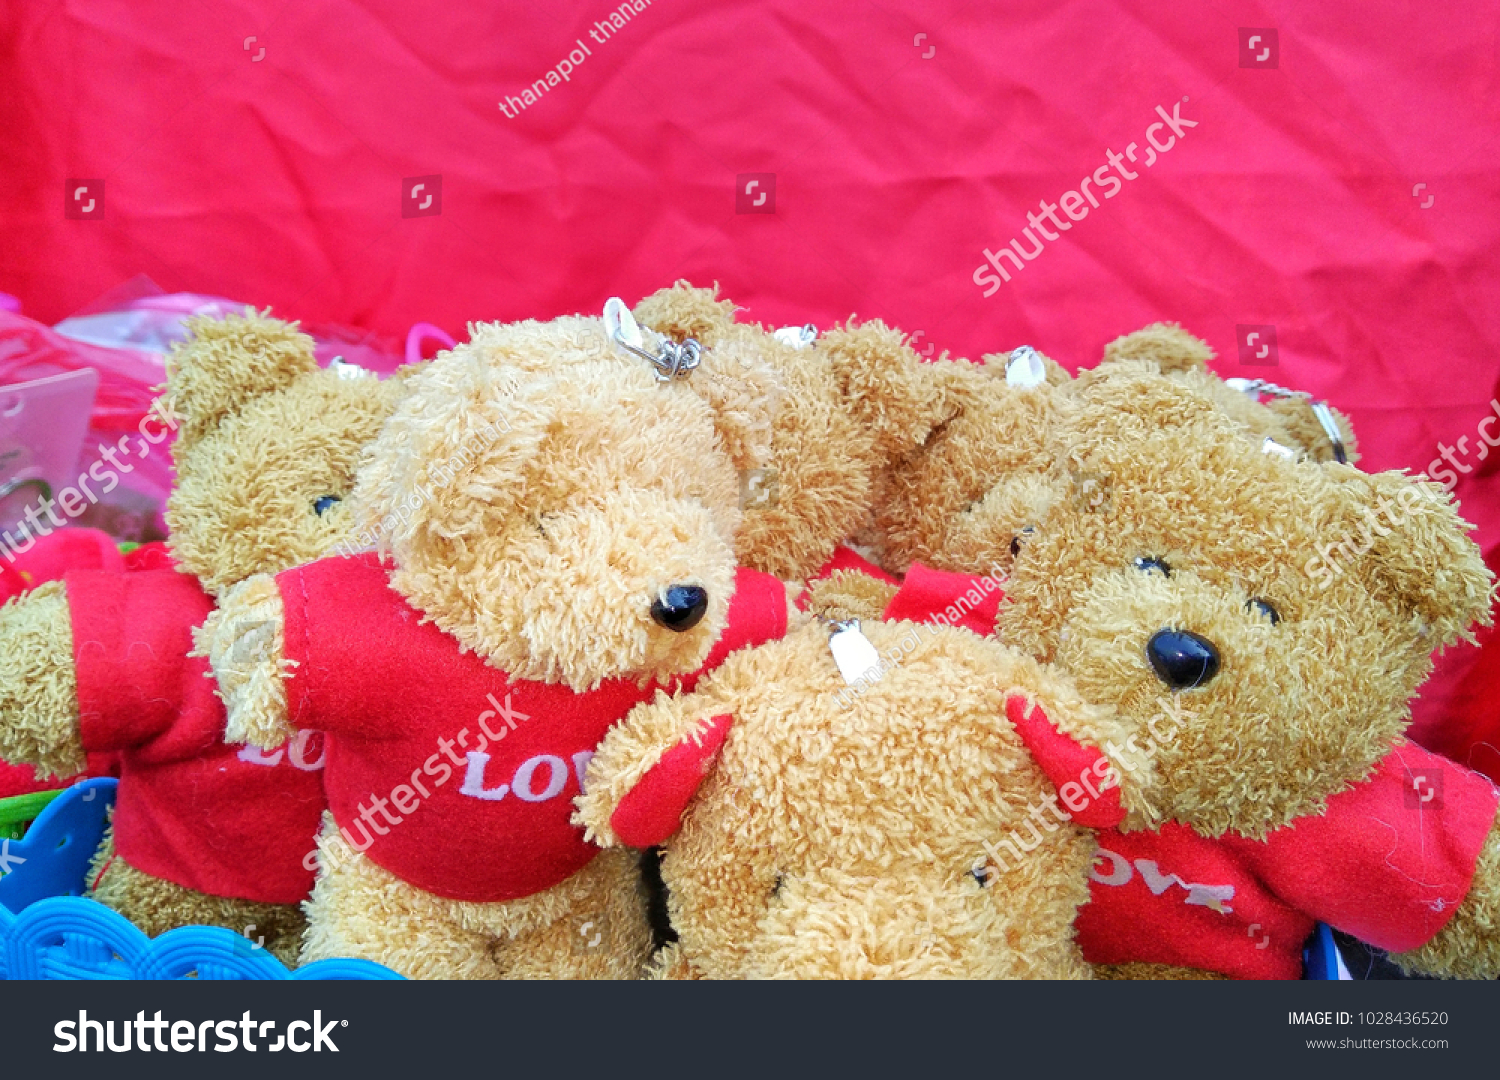 Teddy bear with red flower in the heart of Valentine's Day #1028436520